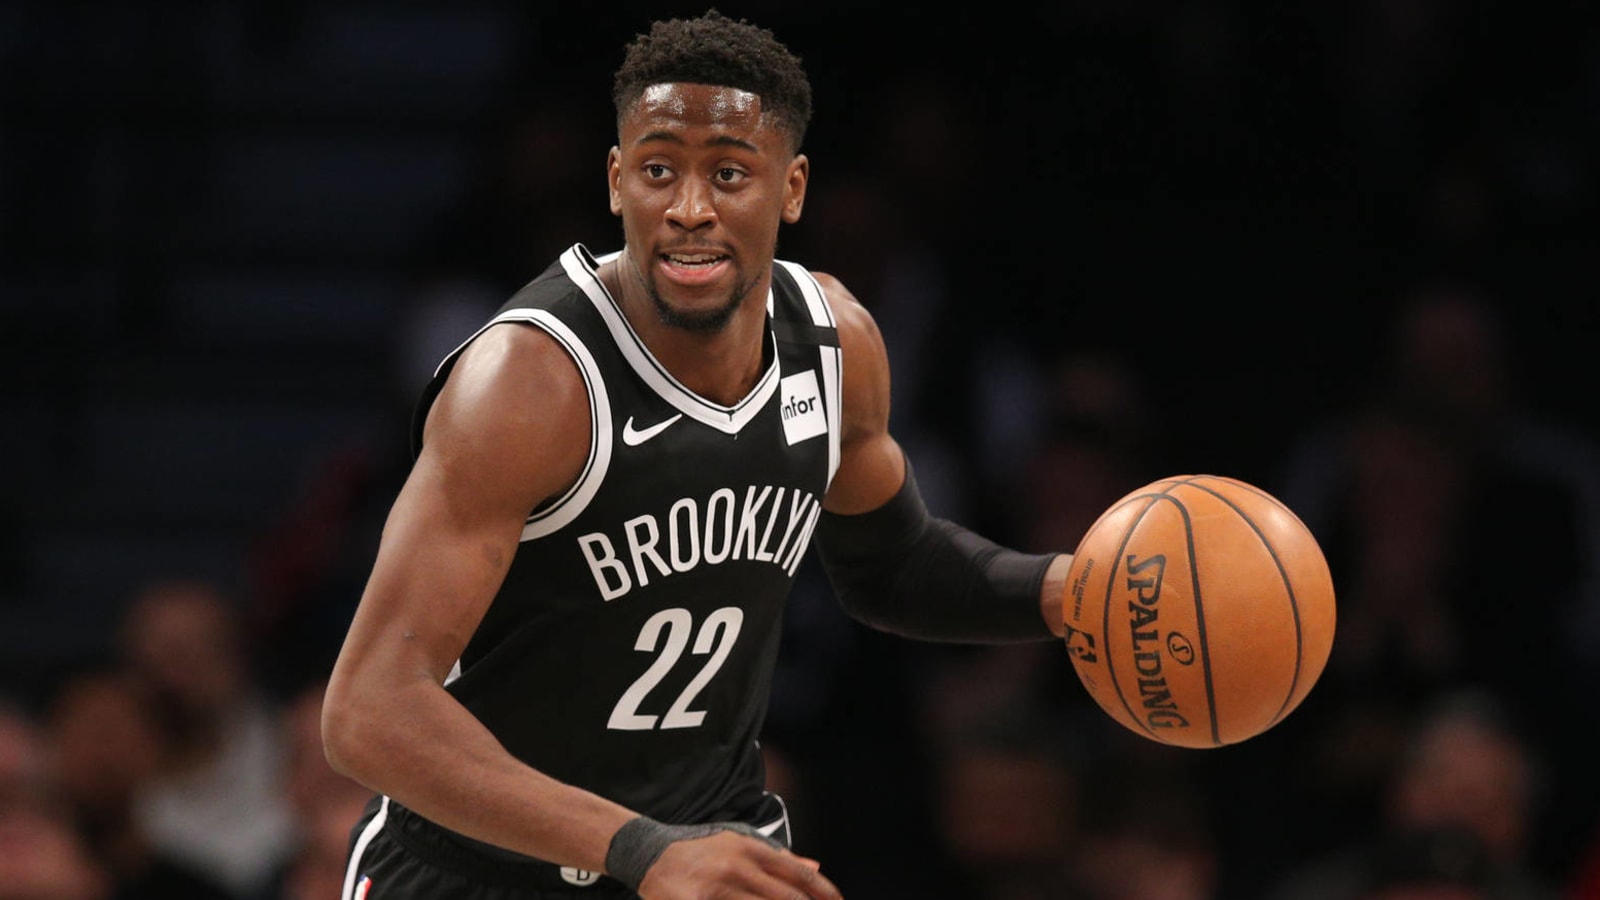 Caris LeVert out indefinitely after MRI finds mass on kidney